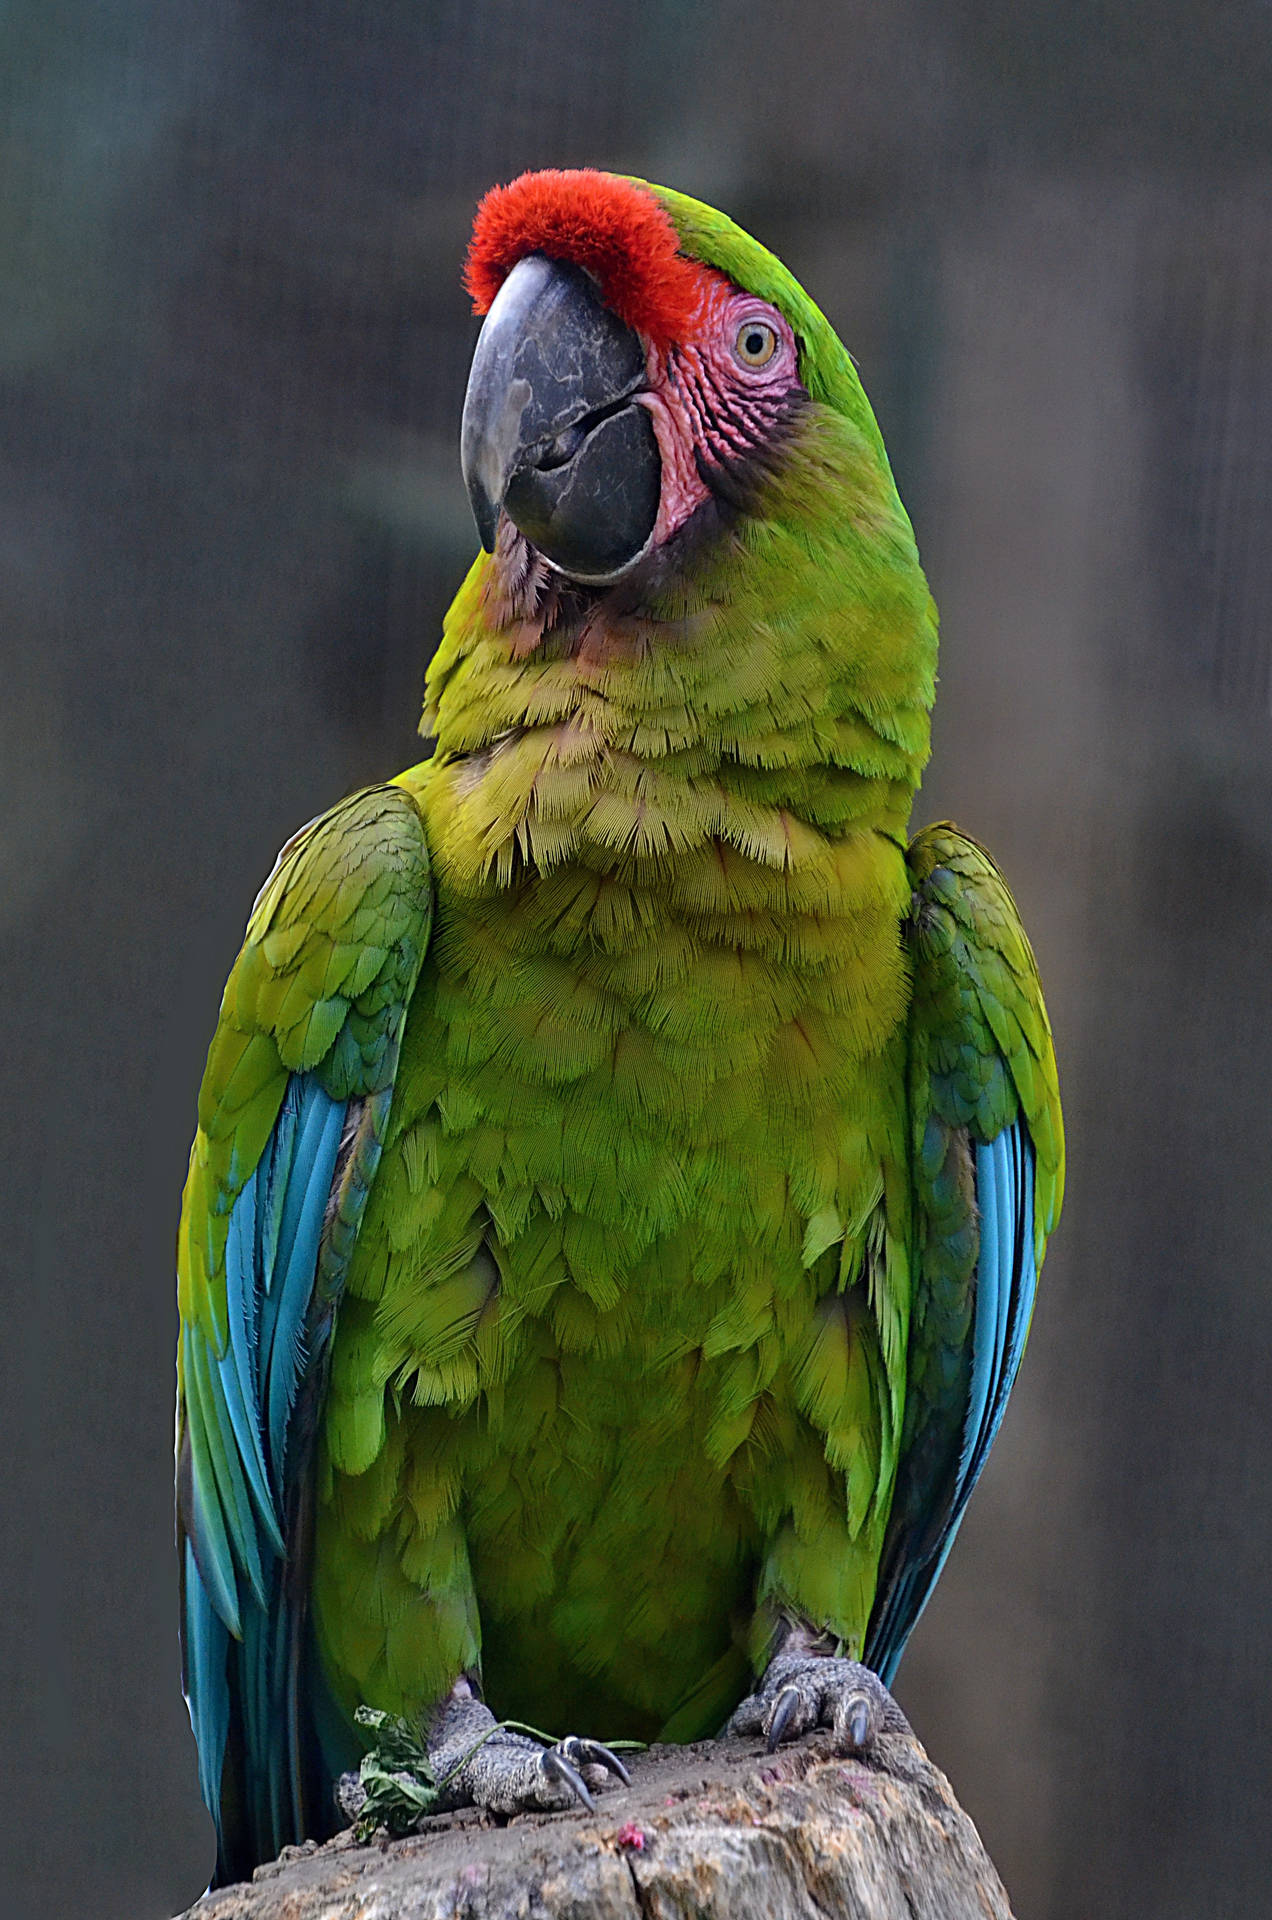 Red, Blue, And Green Parrot Hd Background